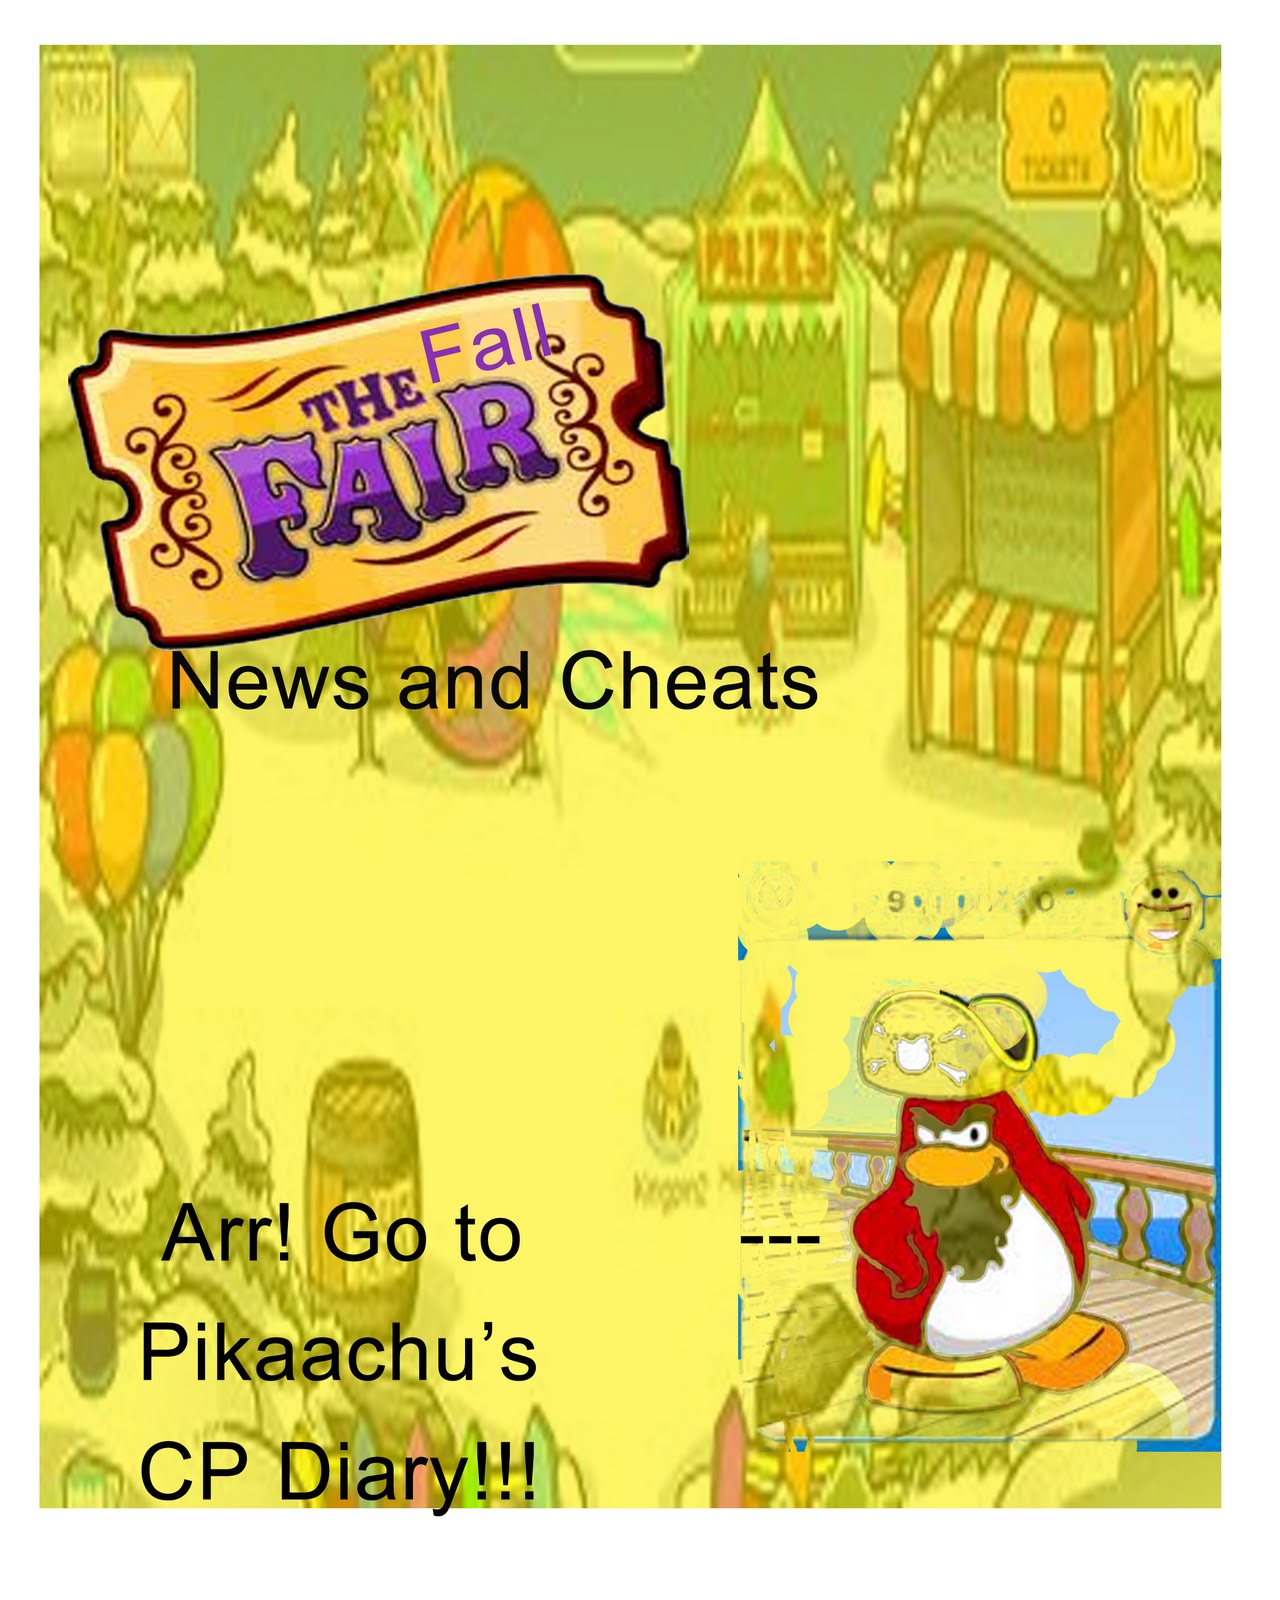 Pikaachu's Club Penguin Diary -Cheats and More-